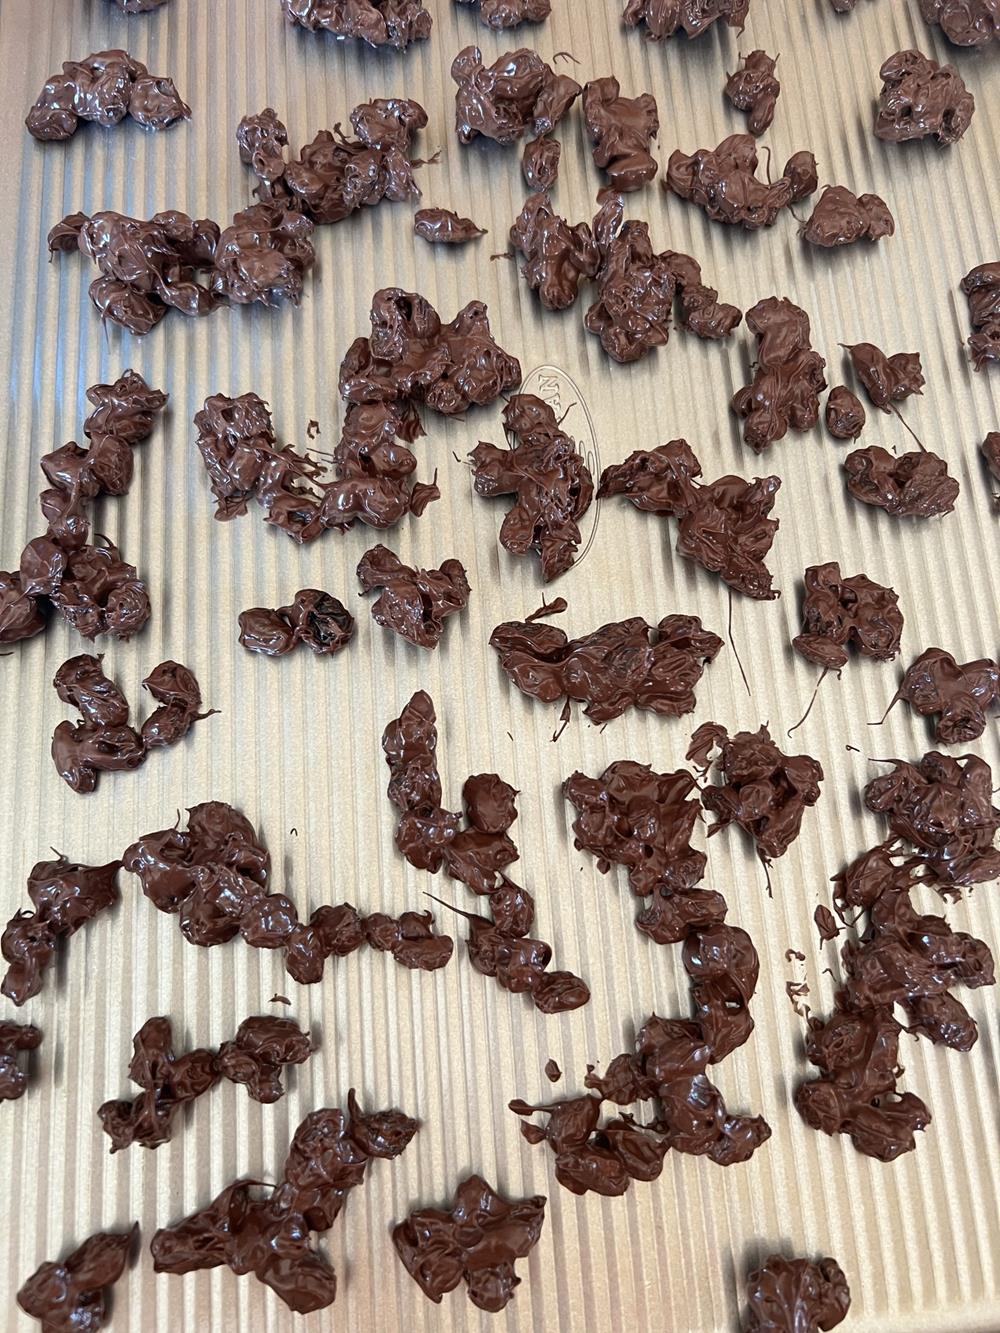 Chocolate covered raisins on cookie sheet